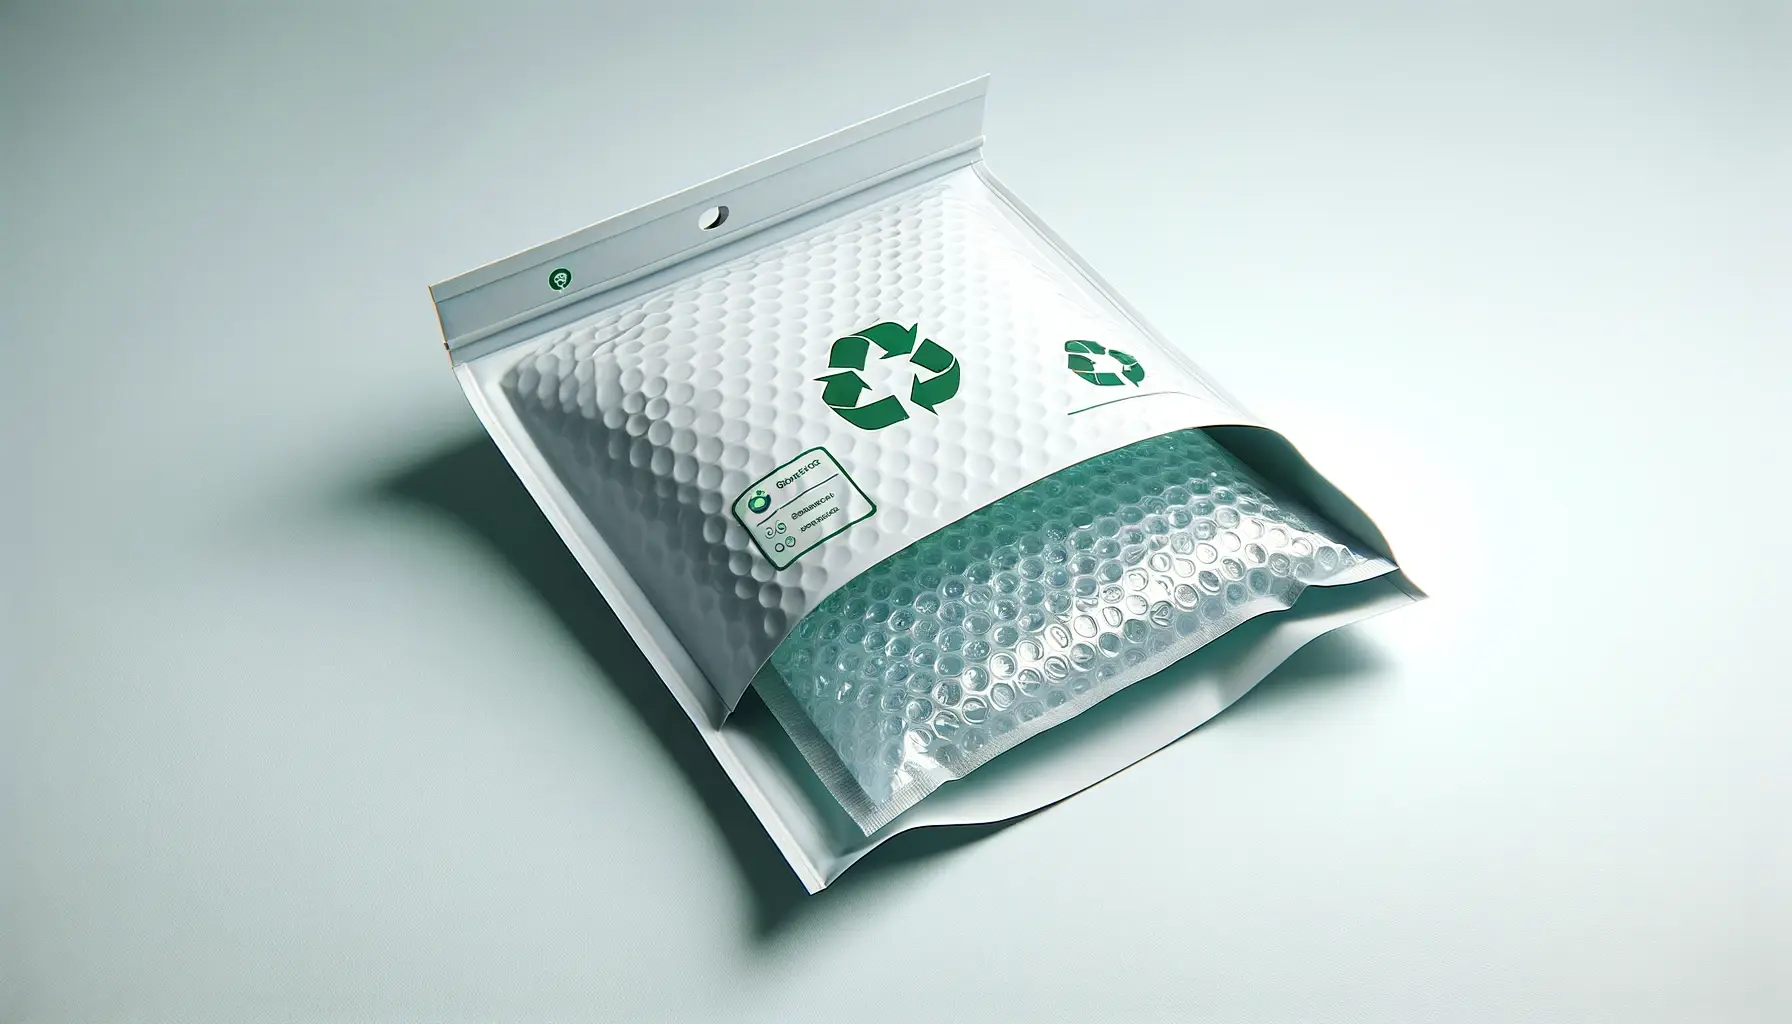 Eco-friendly bubble mailer with green recycling symbols, showcasing poly mailer sizes for secure shipping.